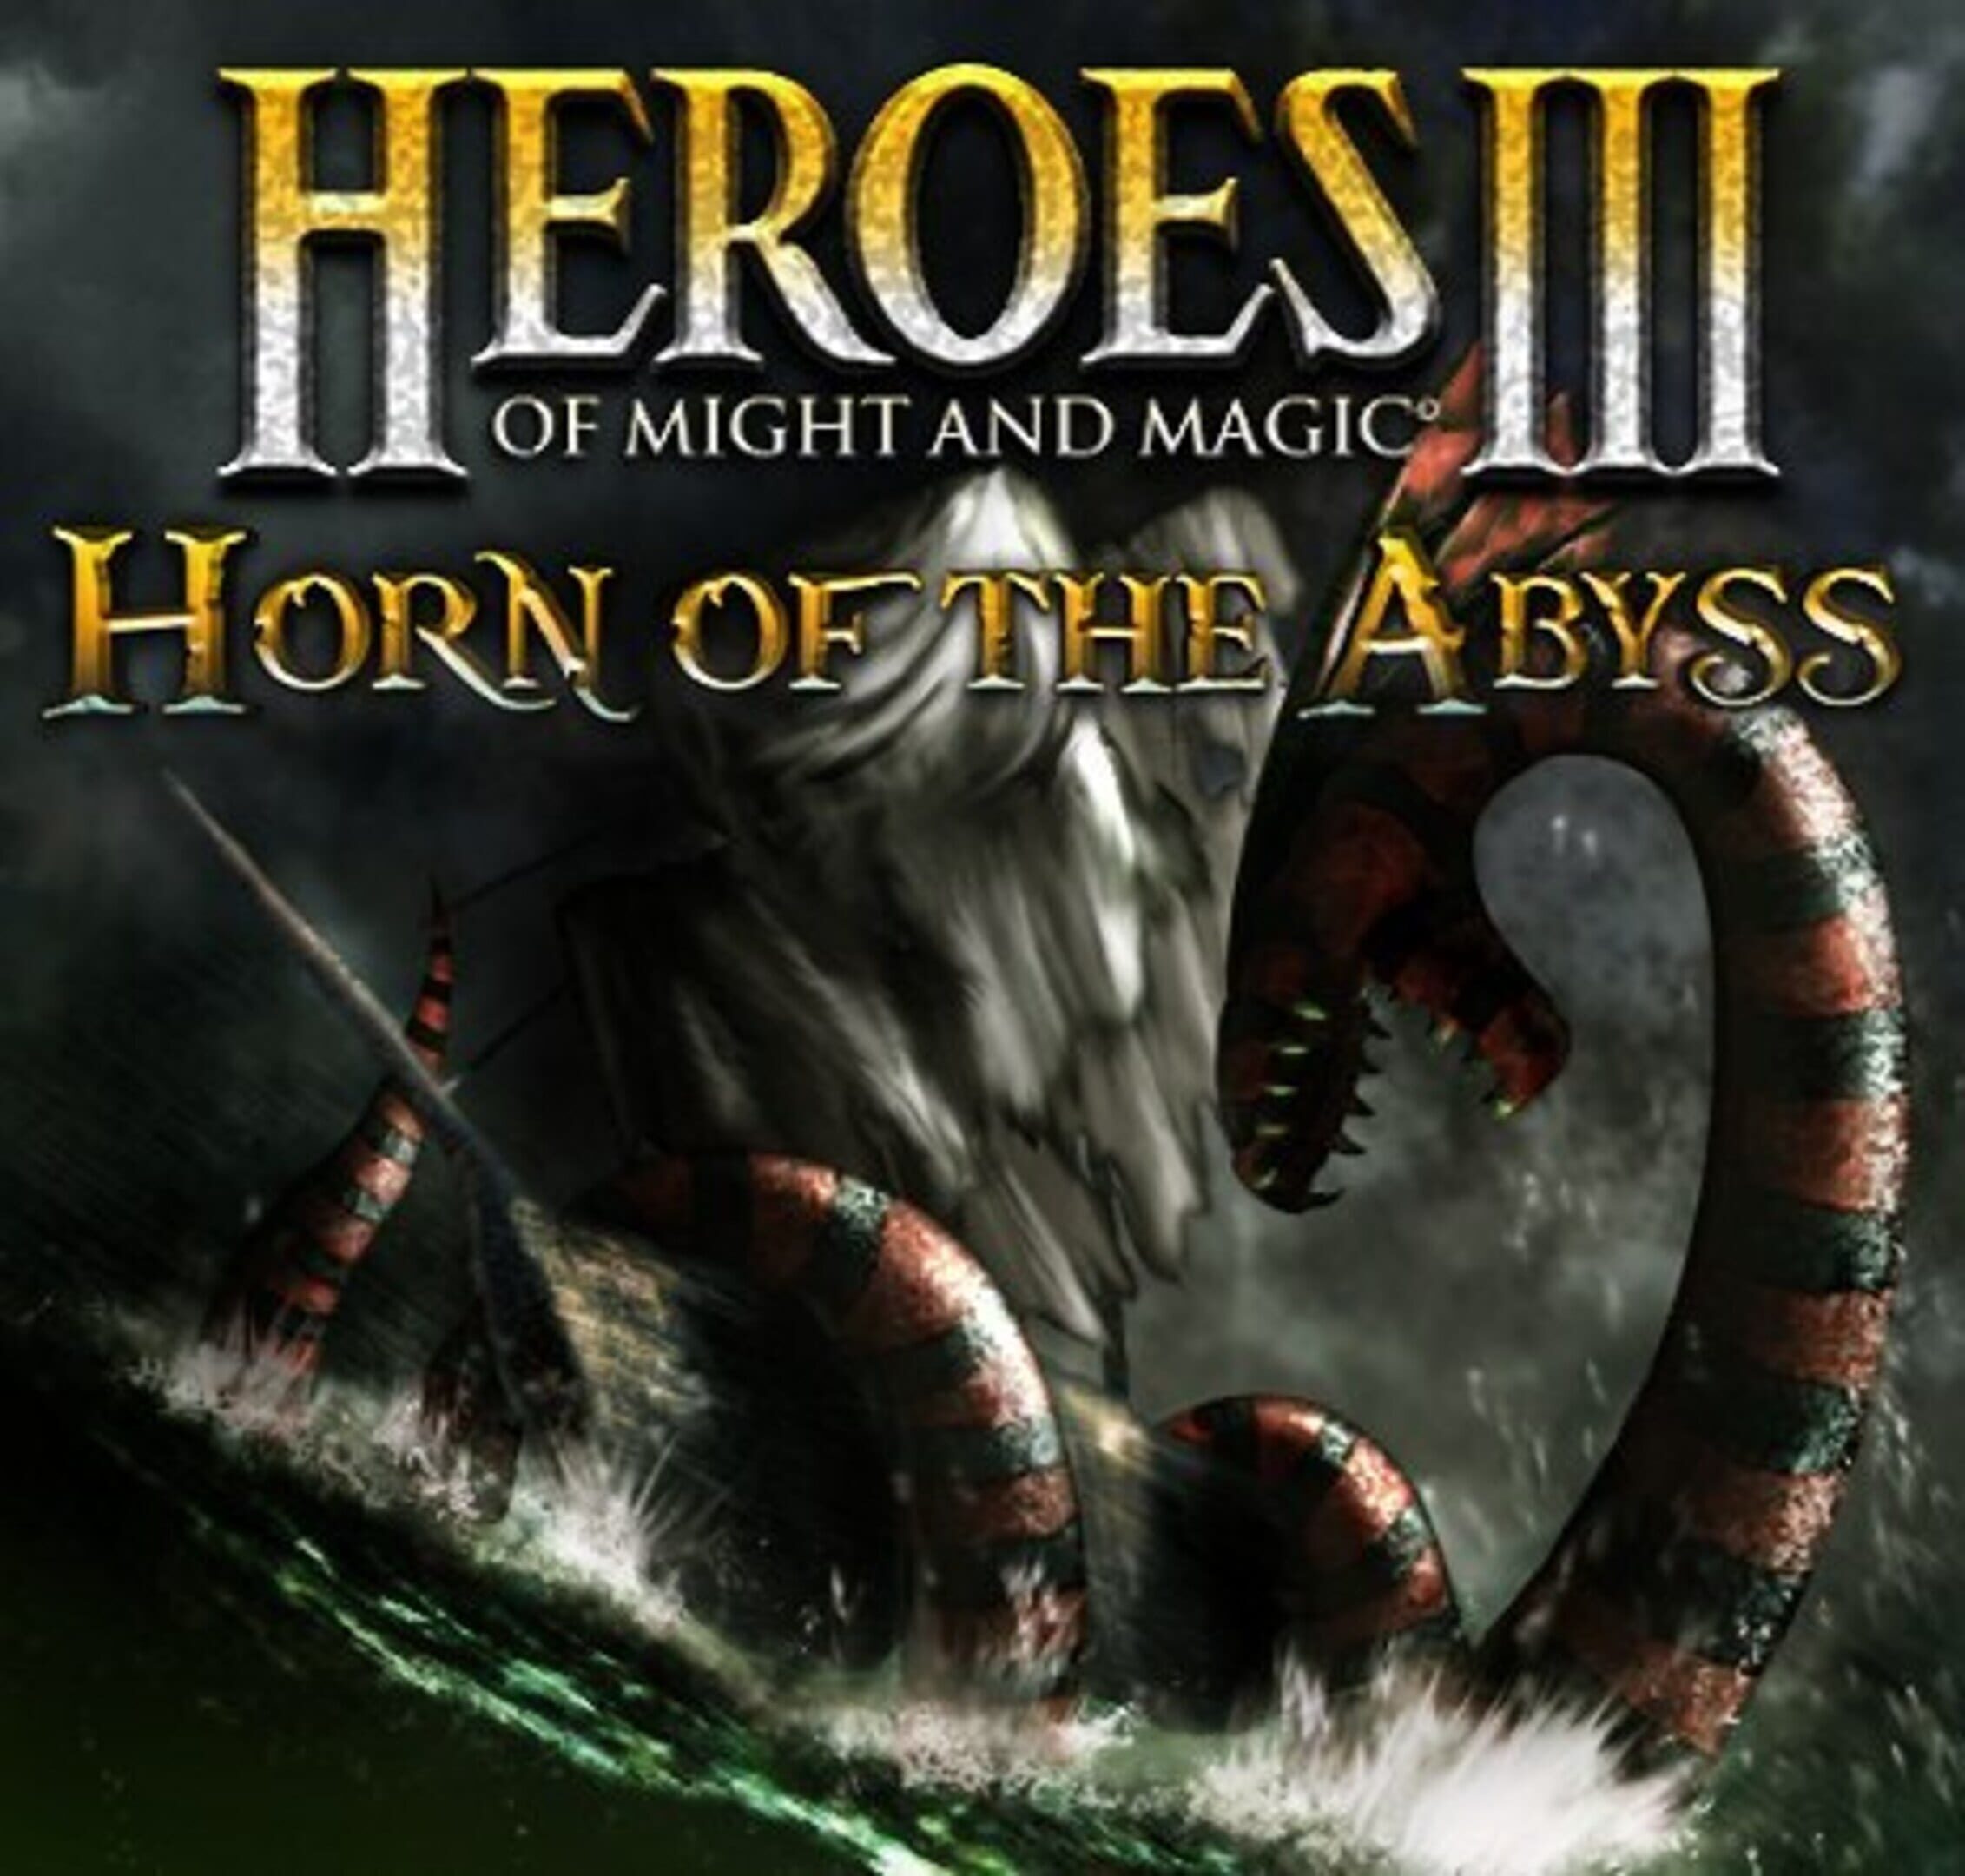 Heroes and magic 3 hota. Heroes of might and Magic III: Horn of the Abyss обложка. Герои 3 Рог бездны обложка. Hota Heroes 3 Hota. Heroes might and Magic 3 рок бездны.